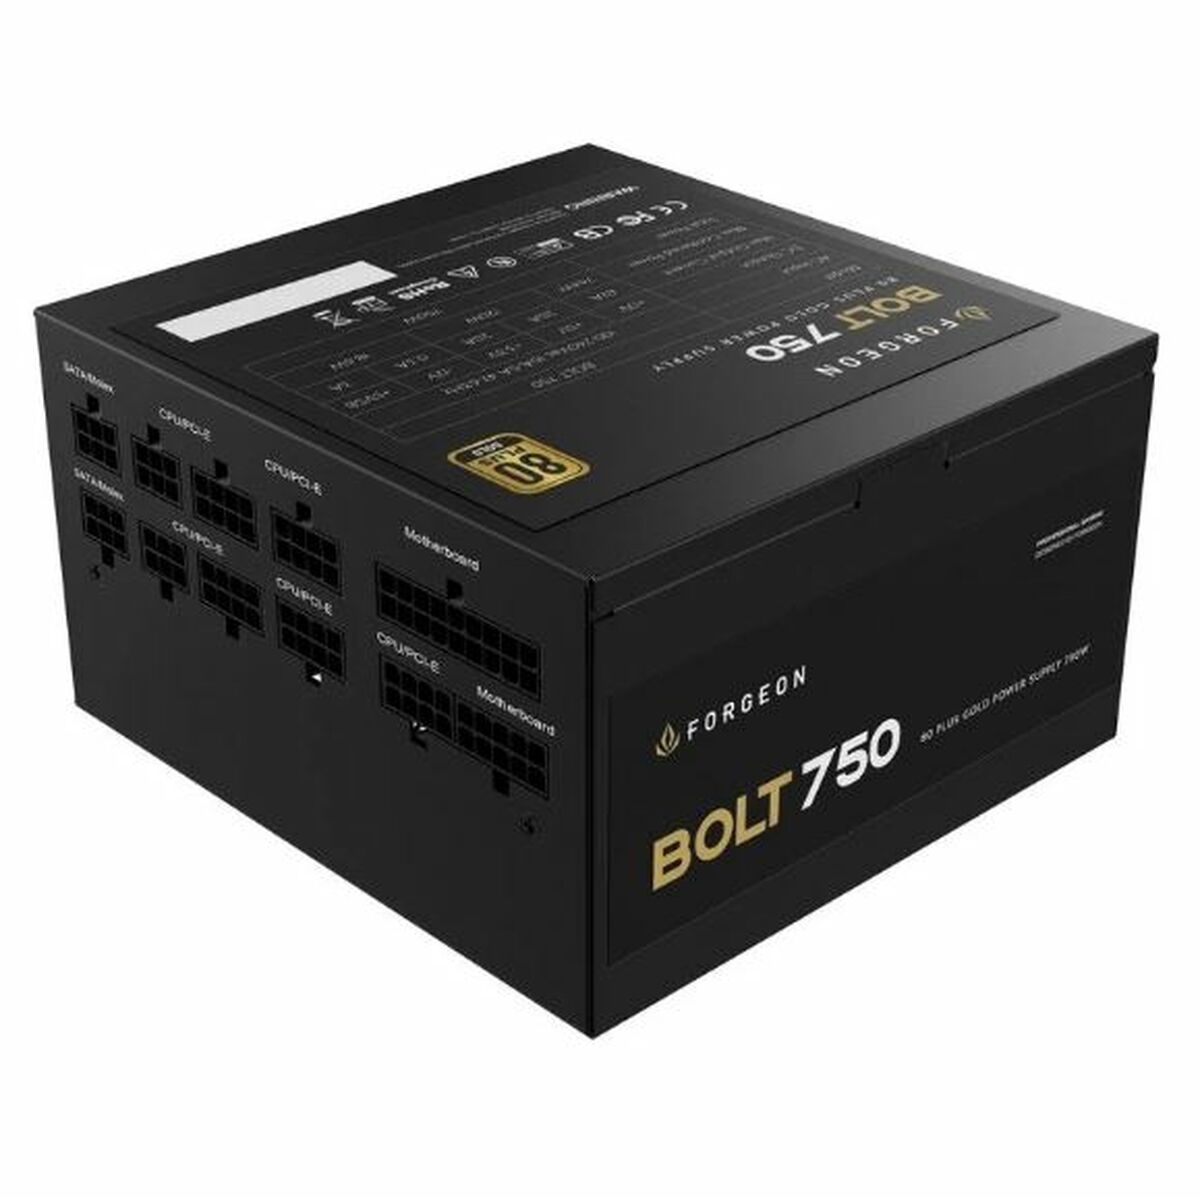 Power supply Forgeon 80 Plus Gold 750 W (Refurbished A)